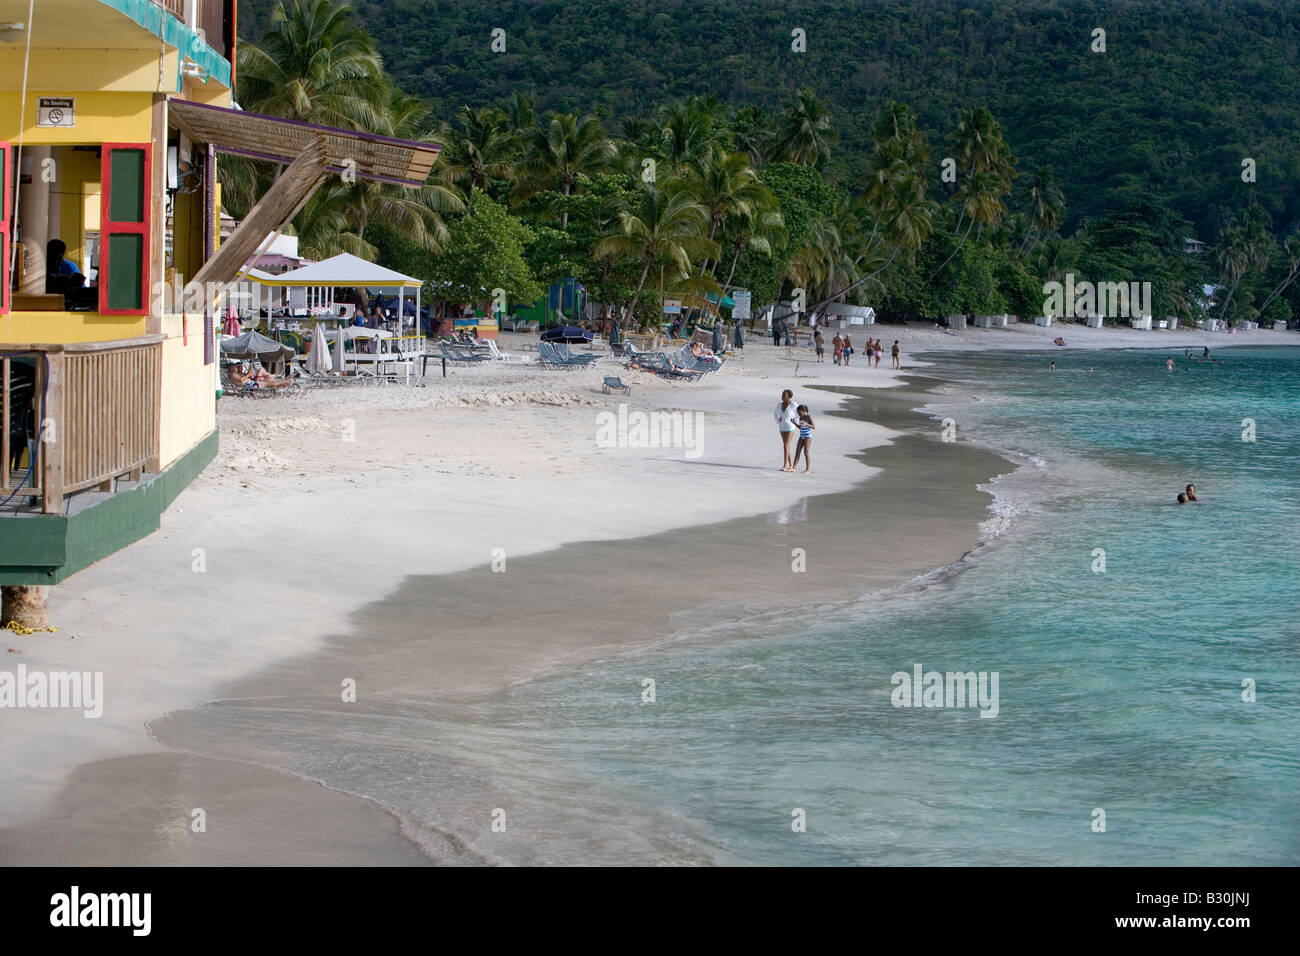 Looking down the beach at Cane Garden Bay on the island of Tortola in the British Virgin Islands. Stock Photo